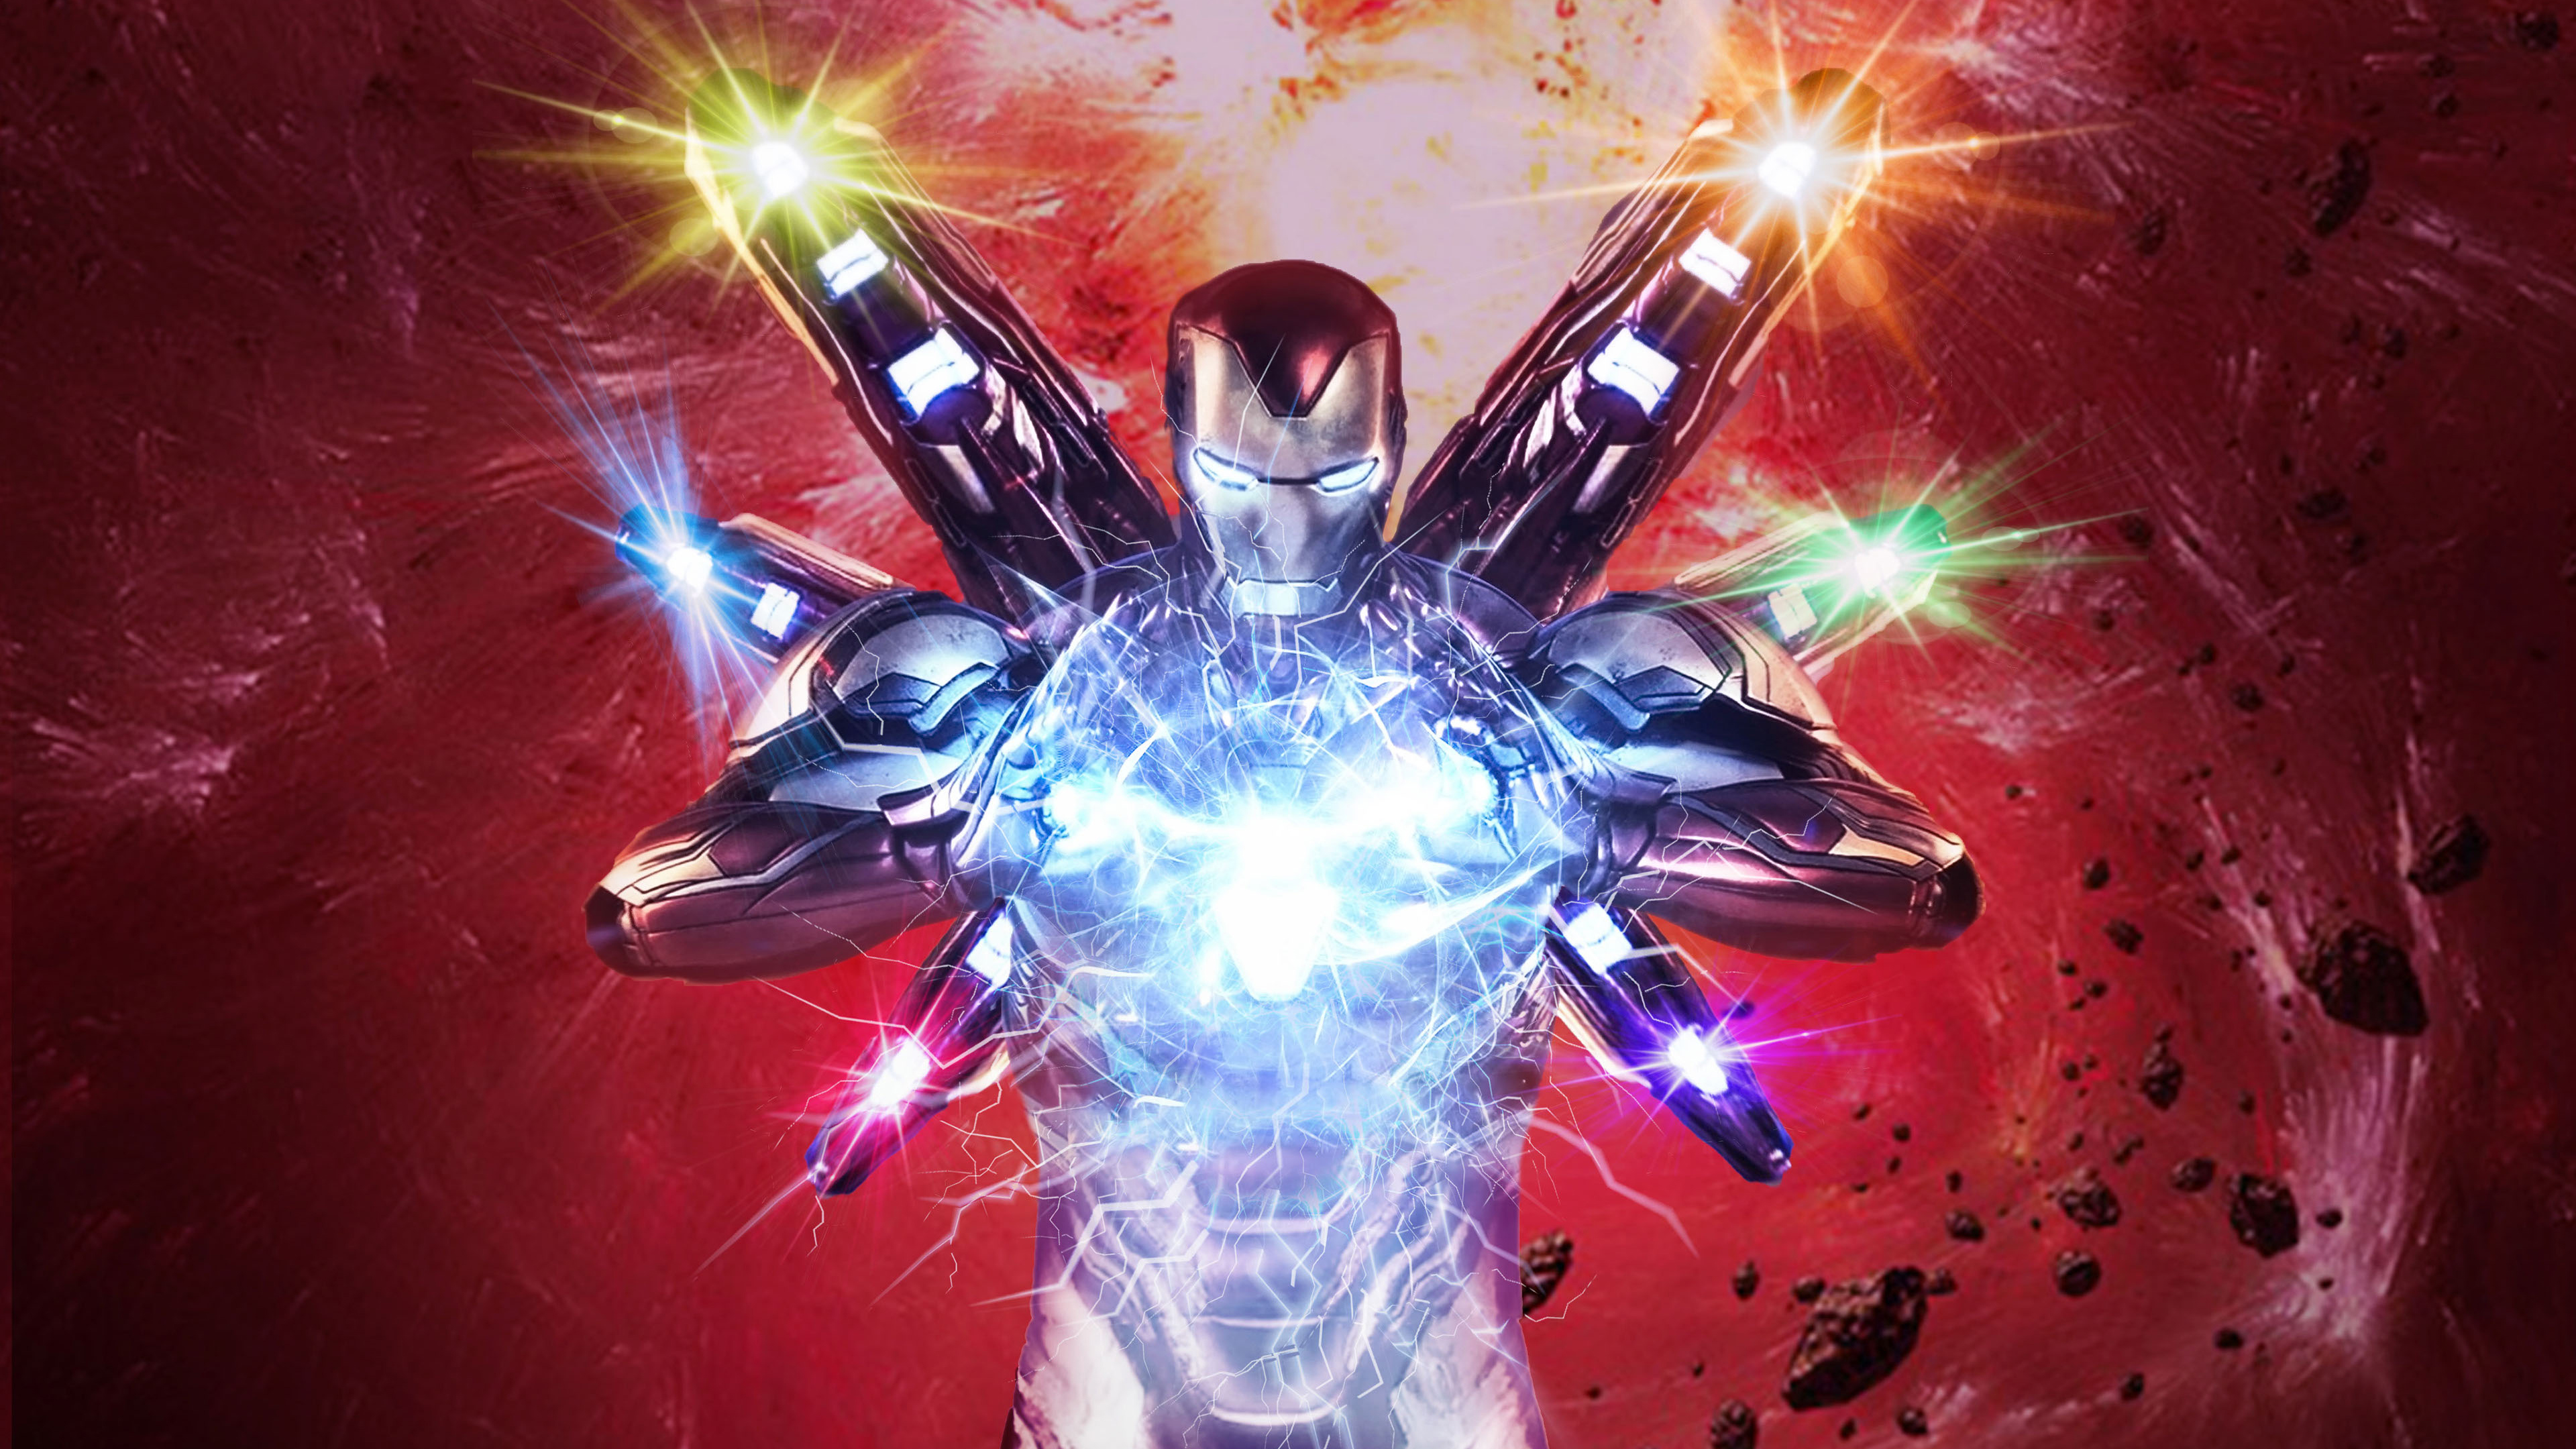 Iron Man in Avengers Endgame 4K Wallpapers | HD Wallpapers